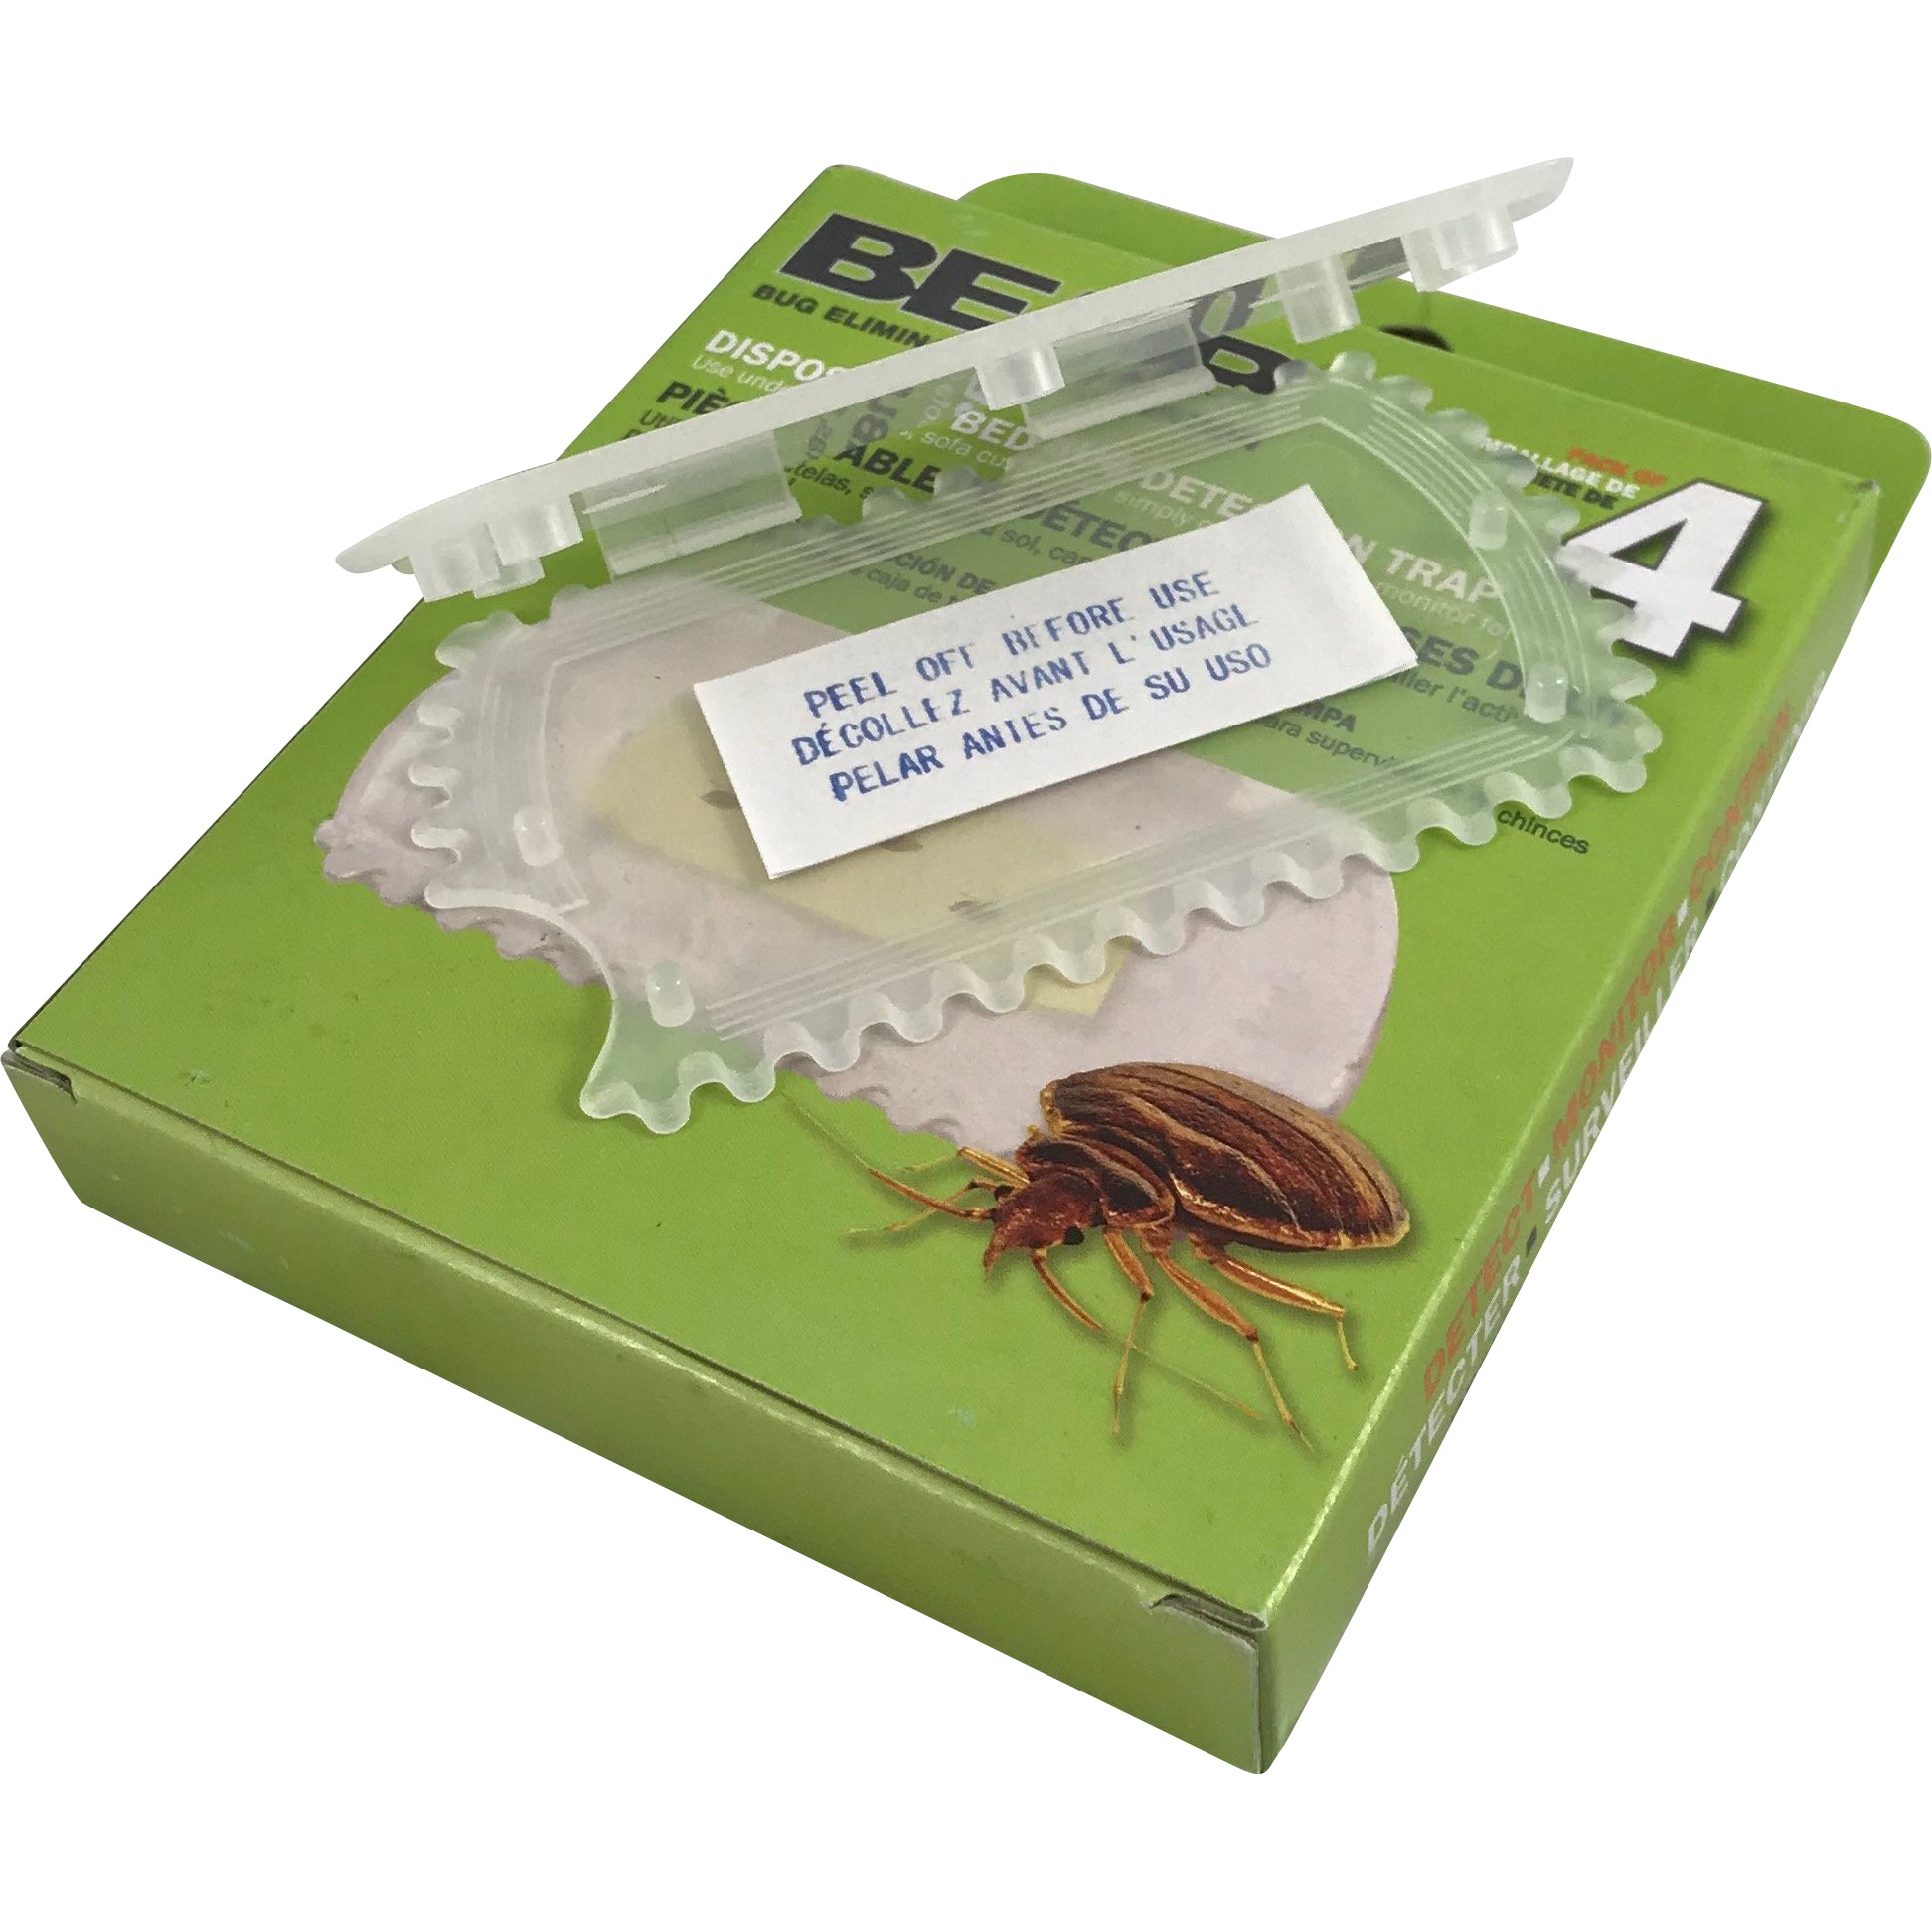 Disposable Bed Bug Detection Trap – Bed Bug SOS